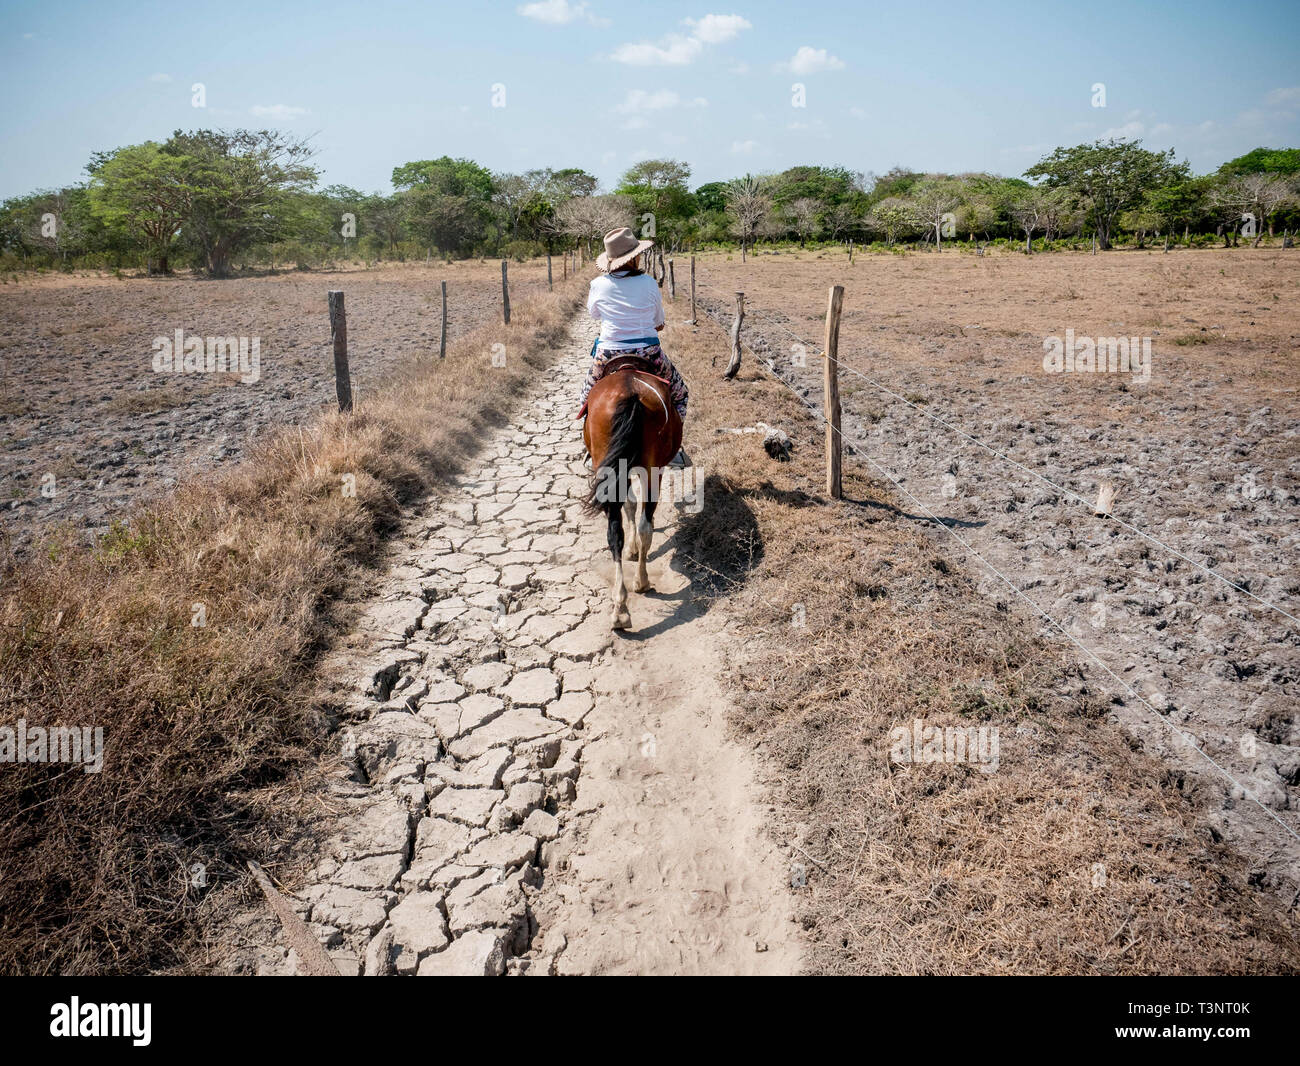 February 9, 2019 - Finca El ParaÃ-So/Yopal, Casanare, Colombia - Cow boy seen riding through an area affected by Drought.Colombian cowboys taking care of the cows in the region of Casanare, eastern Colombia, between the Ands, the Orinoco River and the border with Venezuela. These are Plains and pastures with wide rivers and marshes, a region of big biodiversity. But nowadays, it is in danger because of climate change. Credit: Jana Cavojska/SOPA Images/ZUMA Wire/Alamy Live News Stock Photo